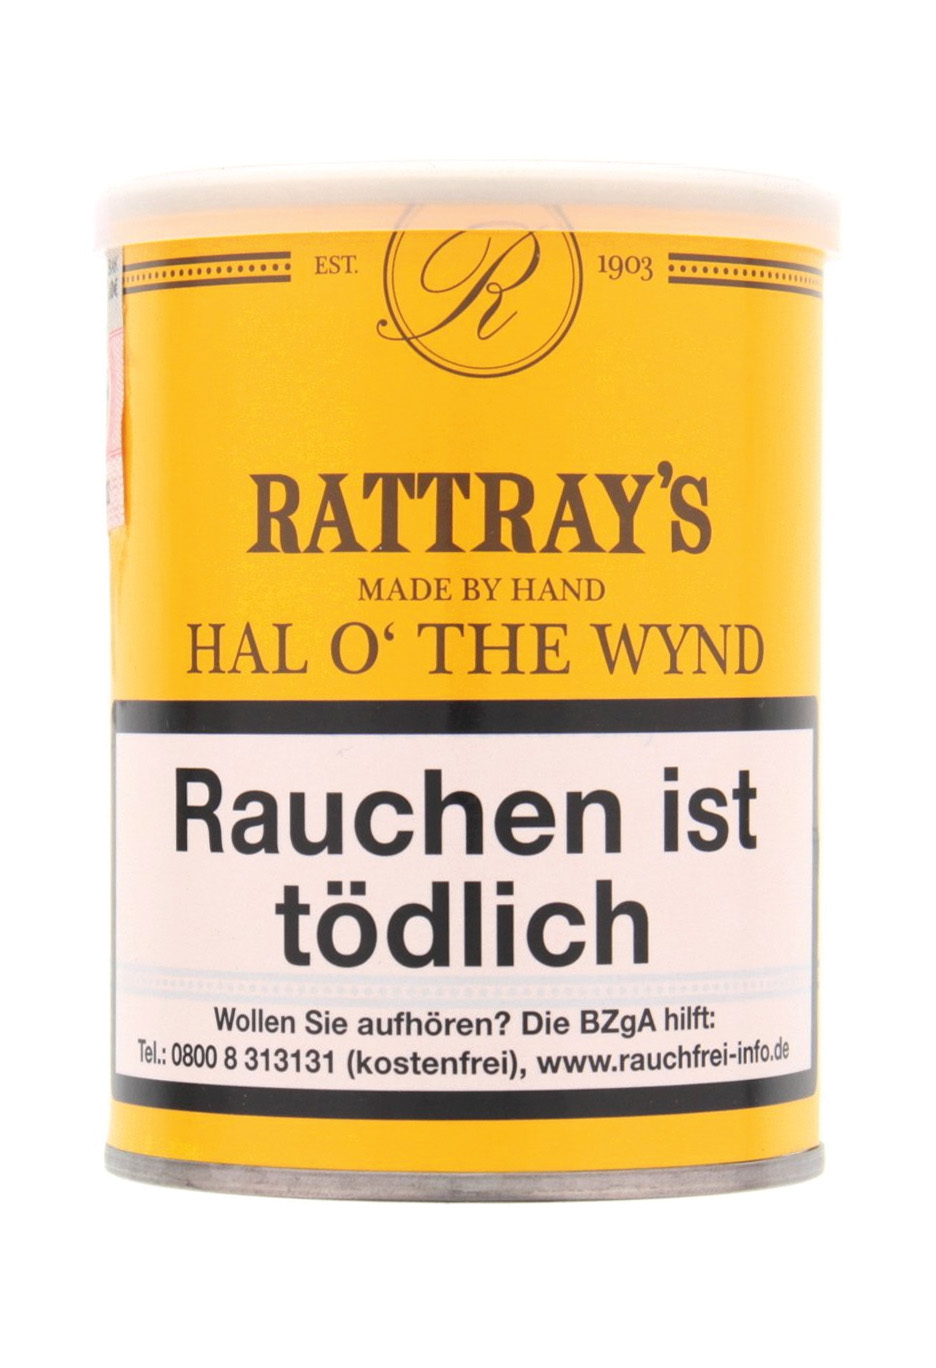 Rattray's Hal O' The Wynd 100g